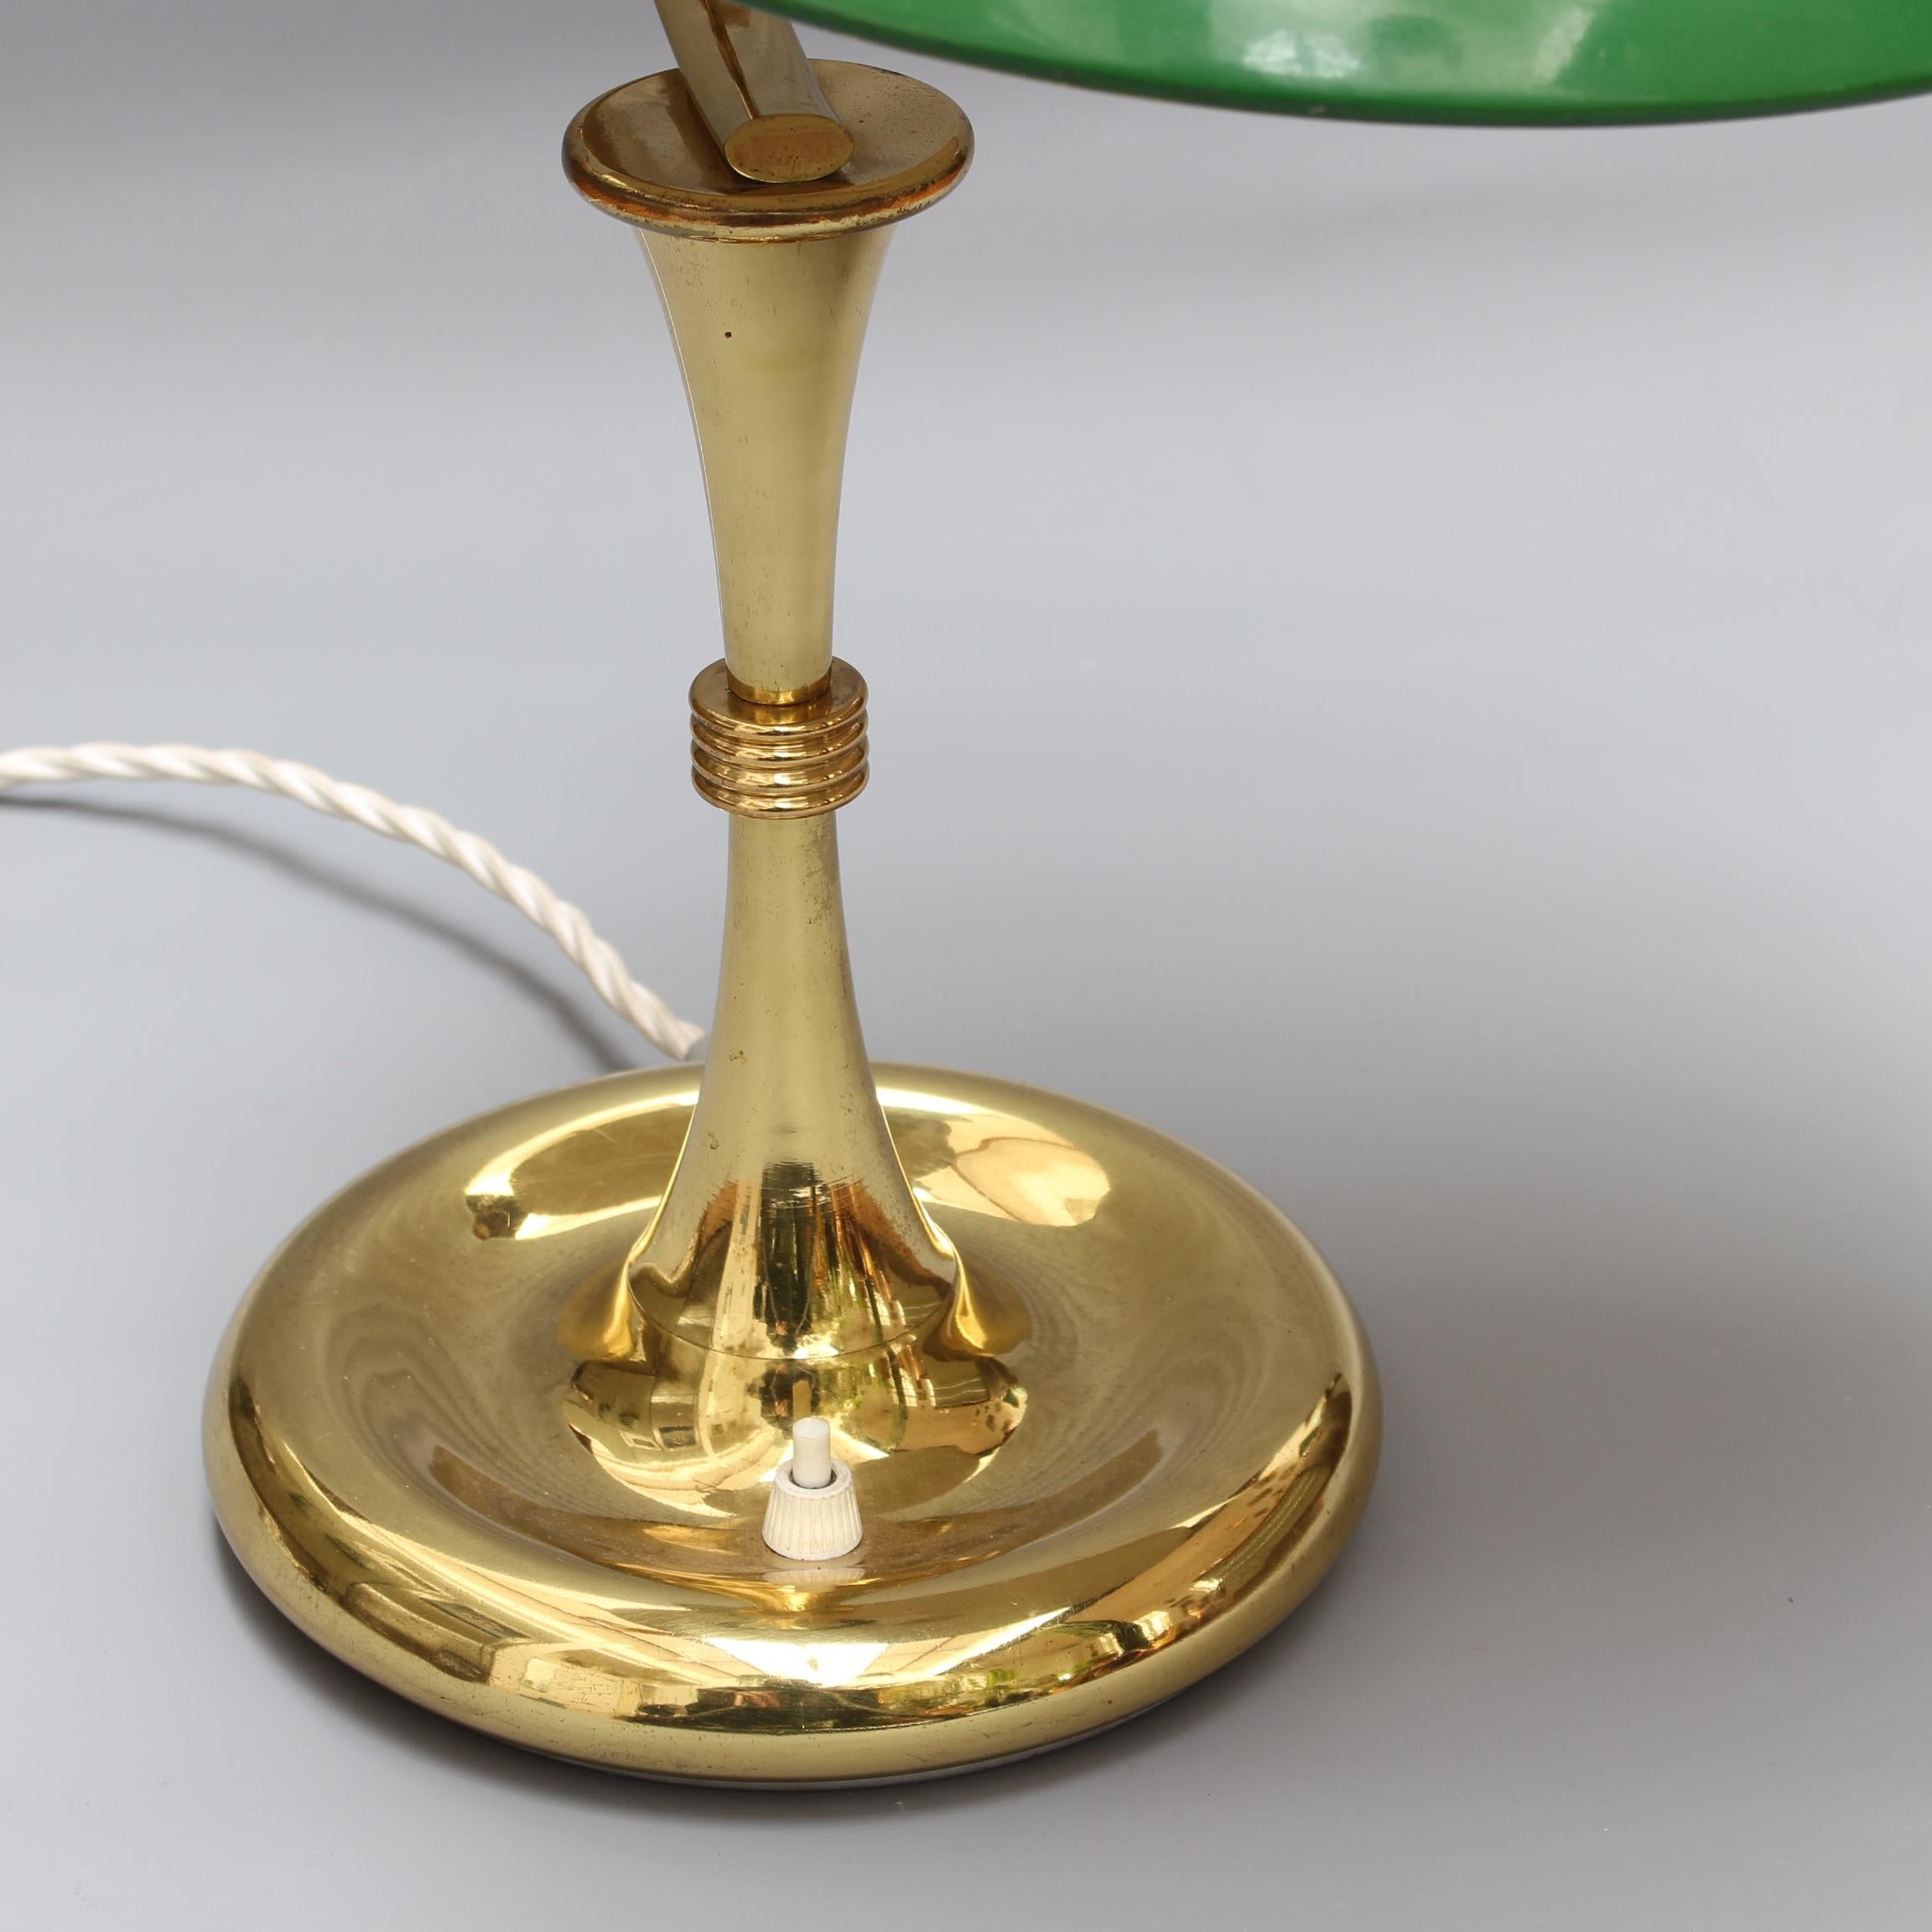 Italian Mid-Century Brass-Covered Desk Lamp with Green Shade 'circa 1950s' For Sale 5